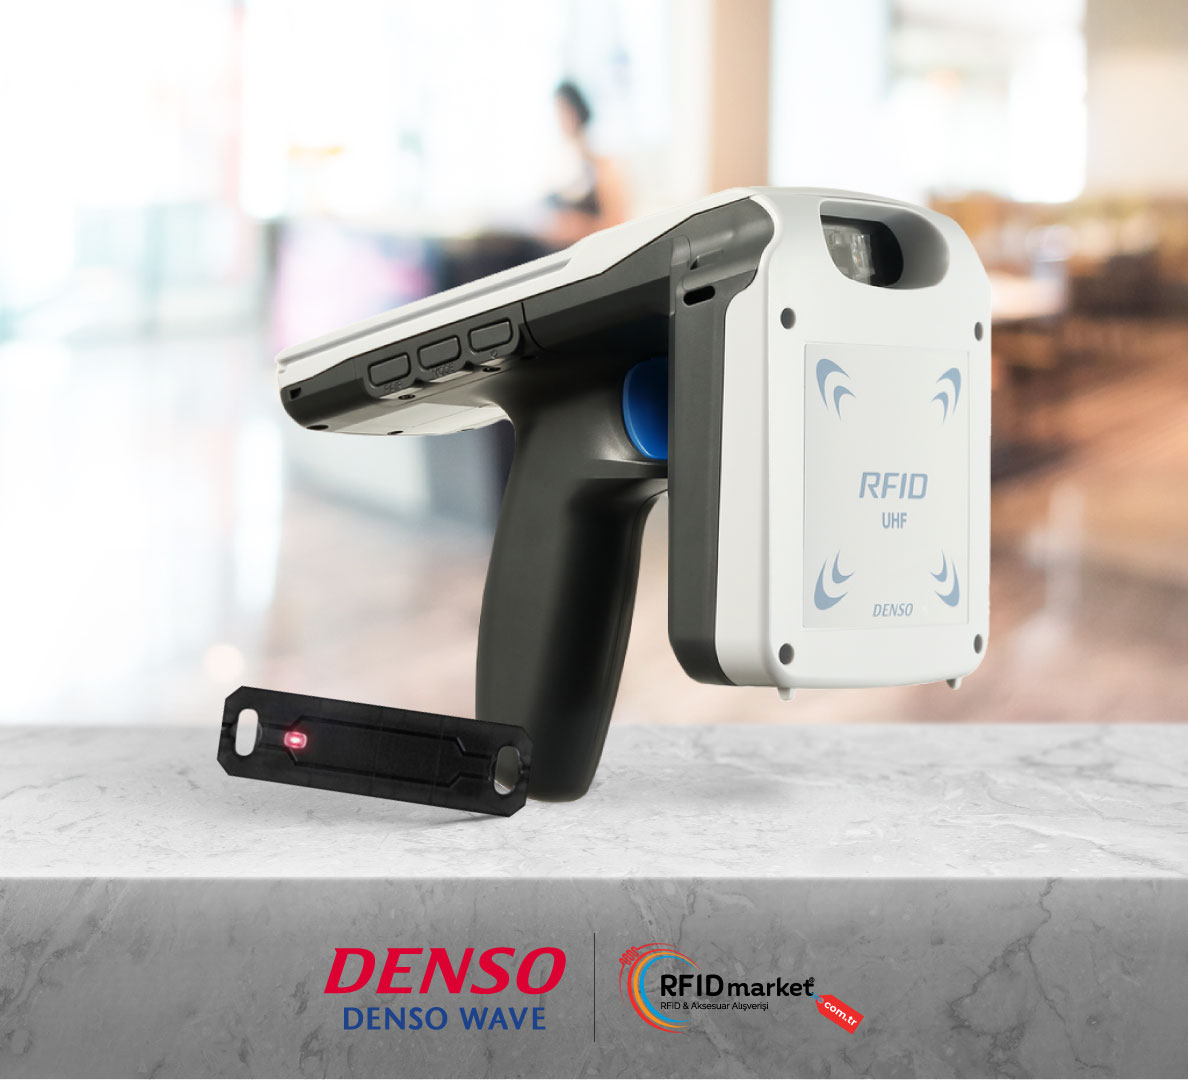 DENSO WAVE Products Now in RFIDmarket